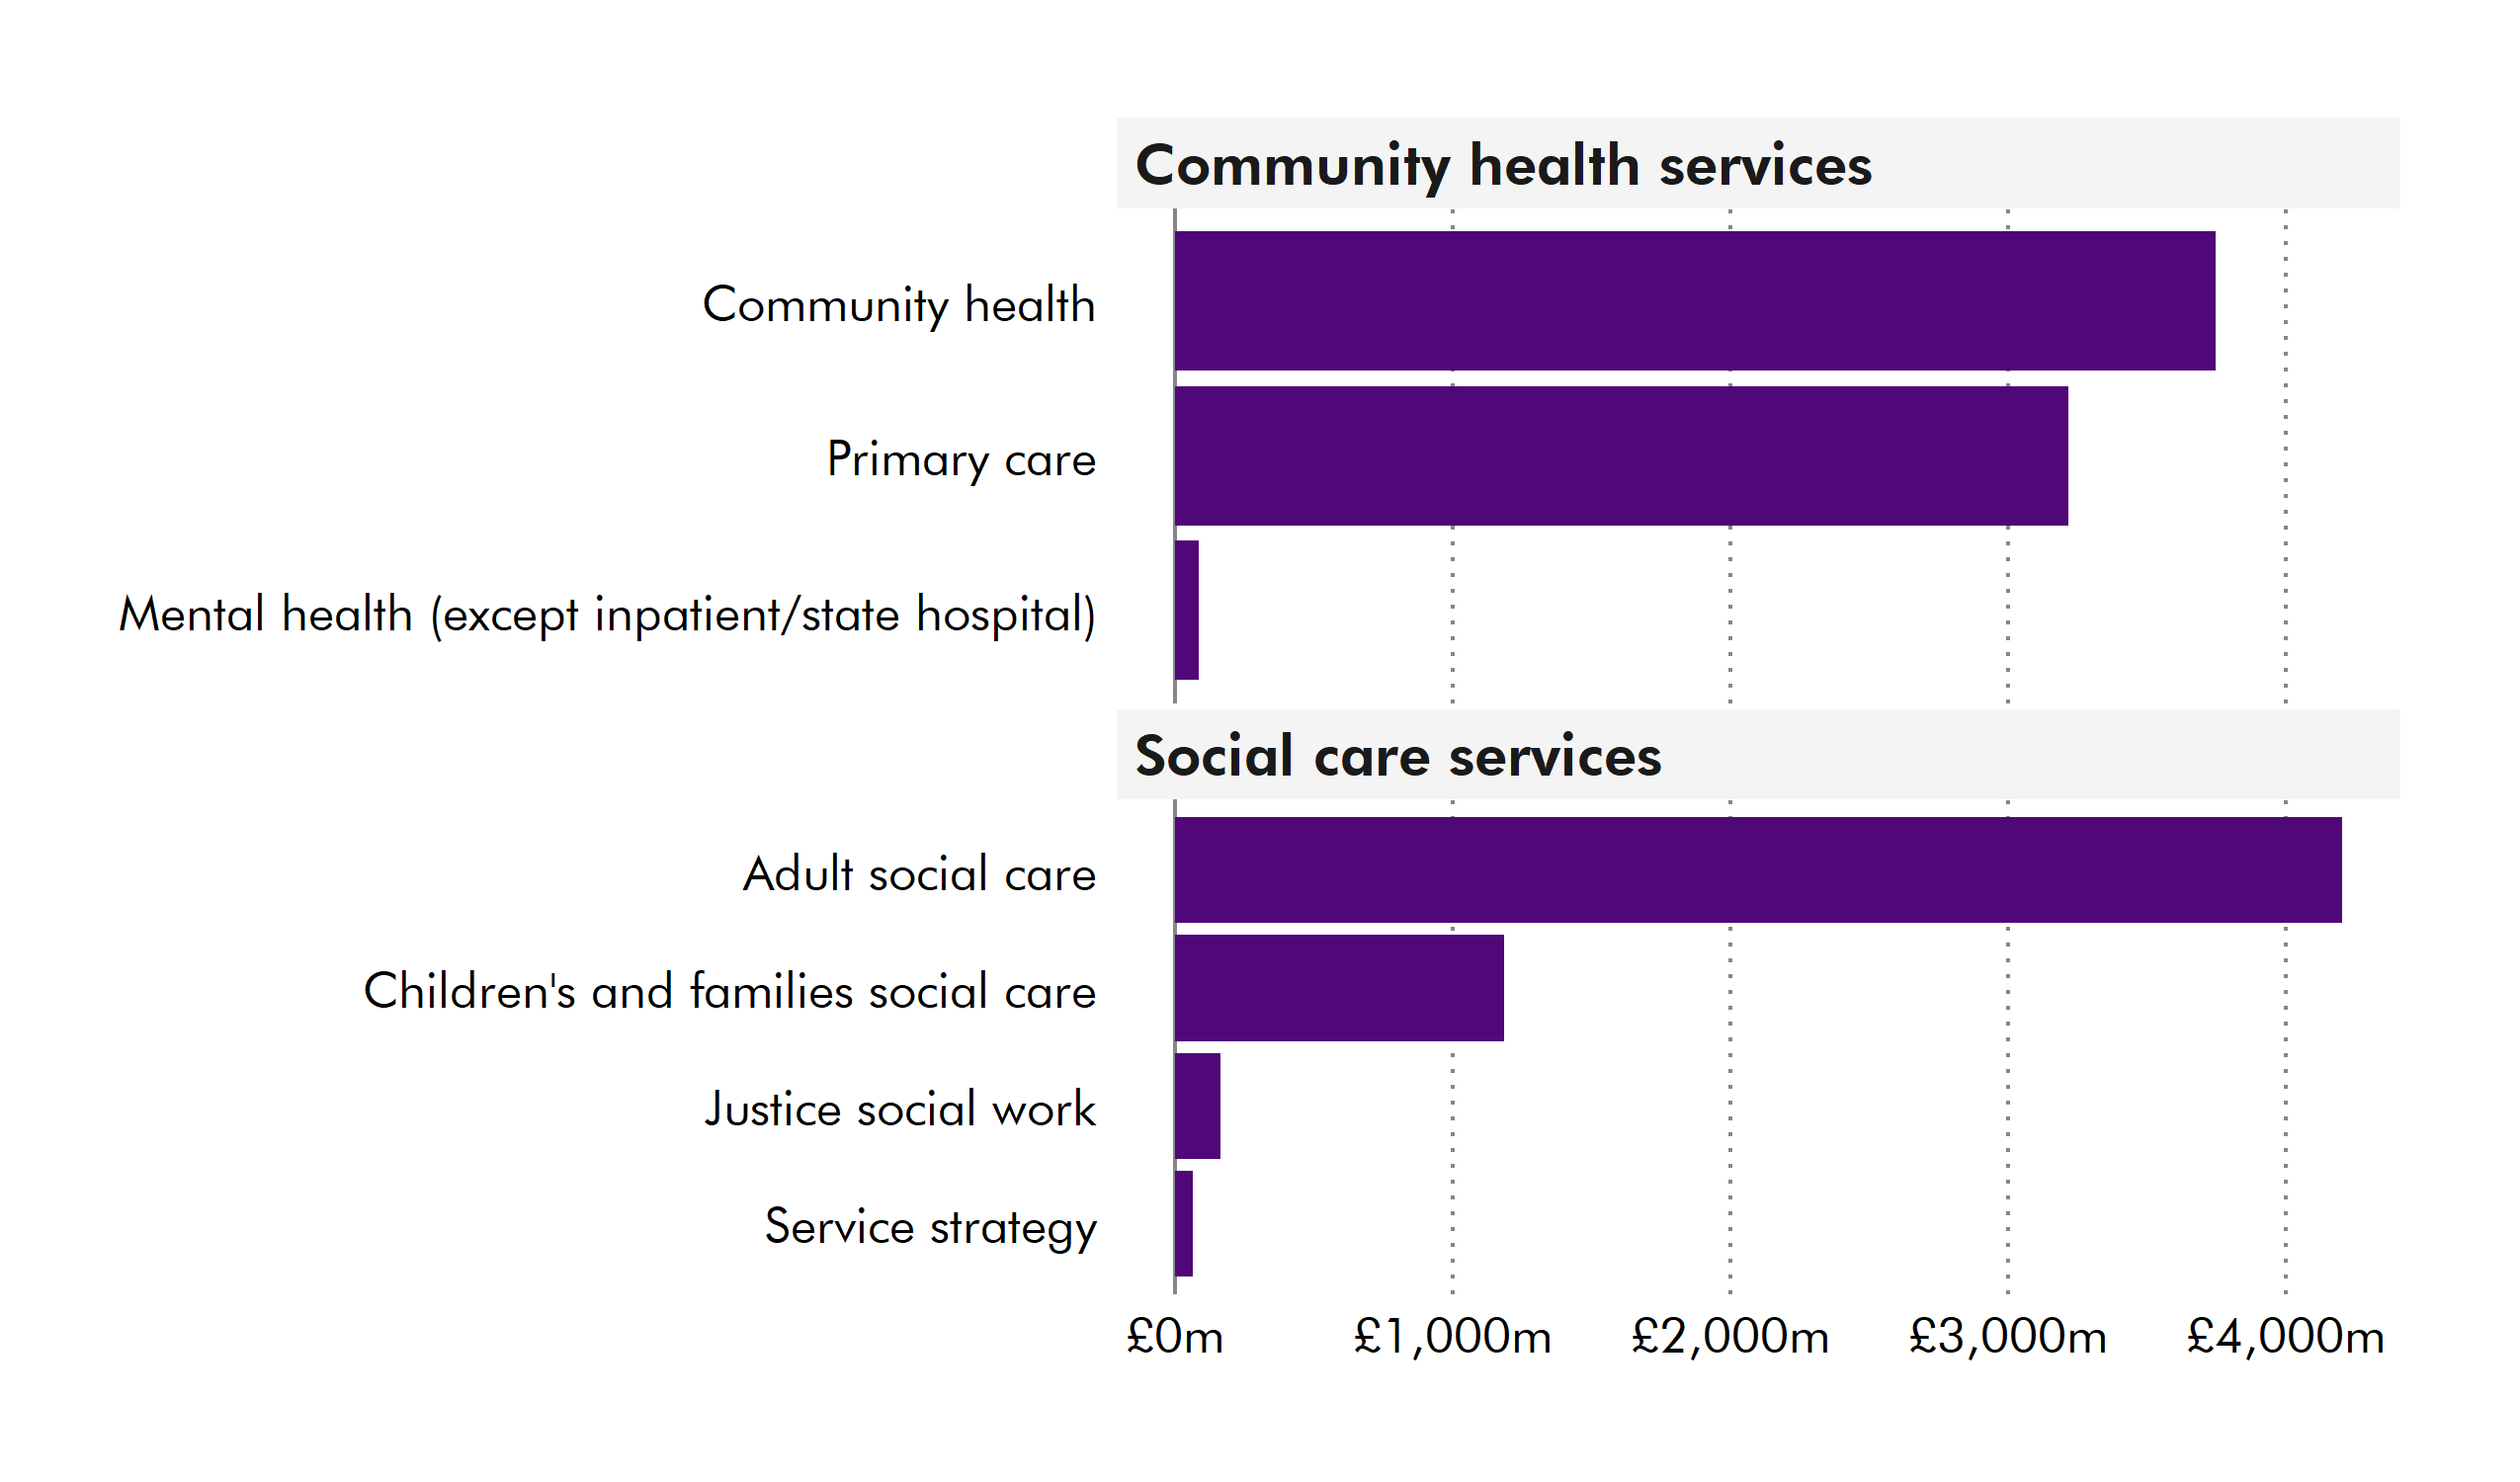 Bar chart showing estimated levels of expenditure on social care and community health services in 2022-23. Adult social care accounts for estimated expenditure of £4.2 billion in 2022-23, which is three-quarters of the total £5.6 billion spend on social care services. A further £7 billion of expenditure is accounted for by community health services.